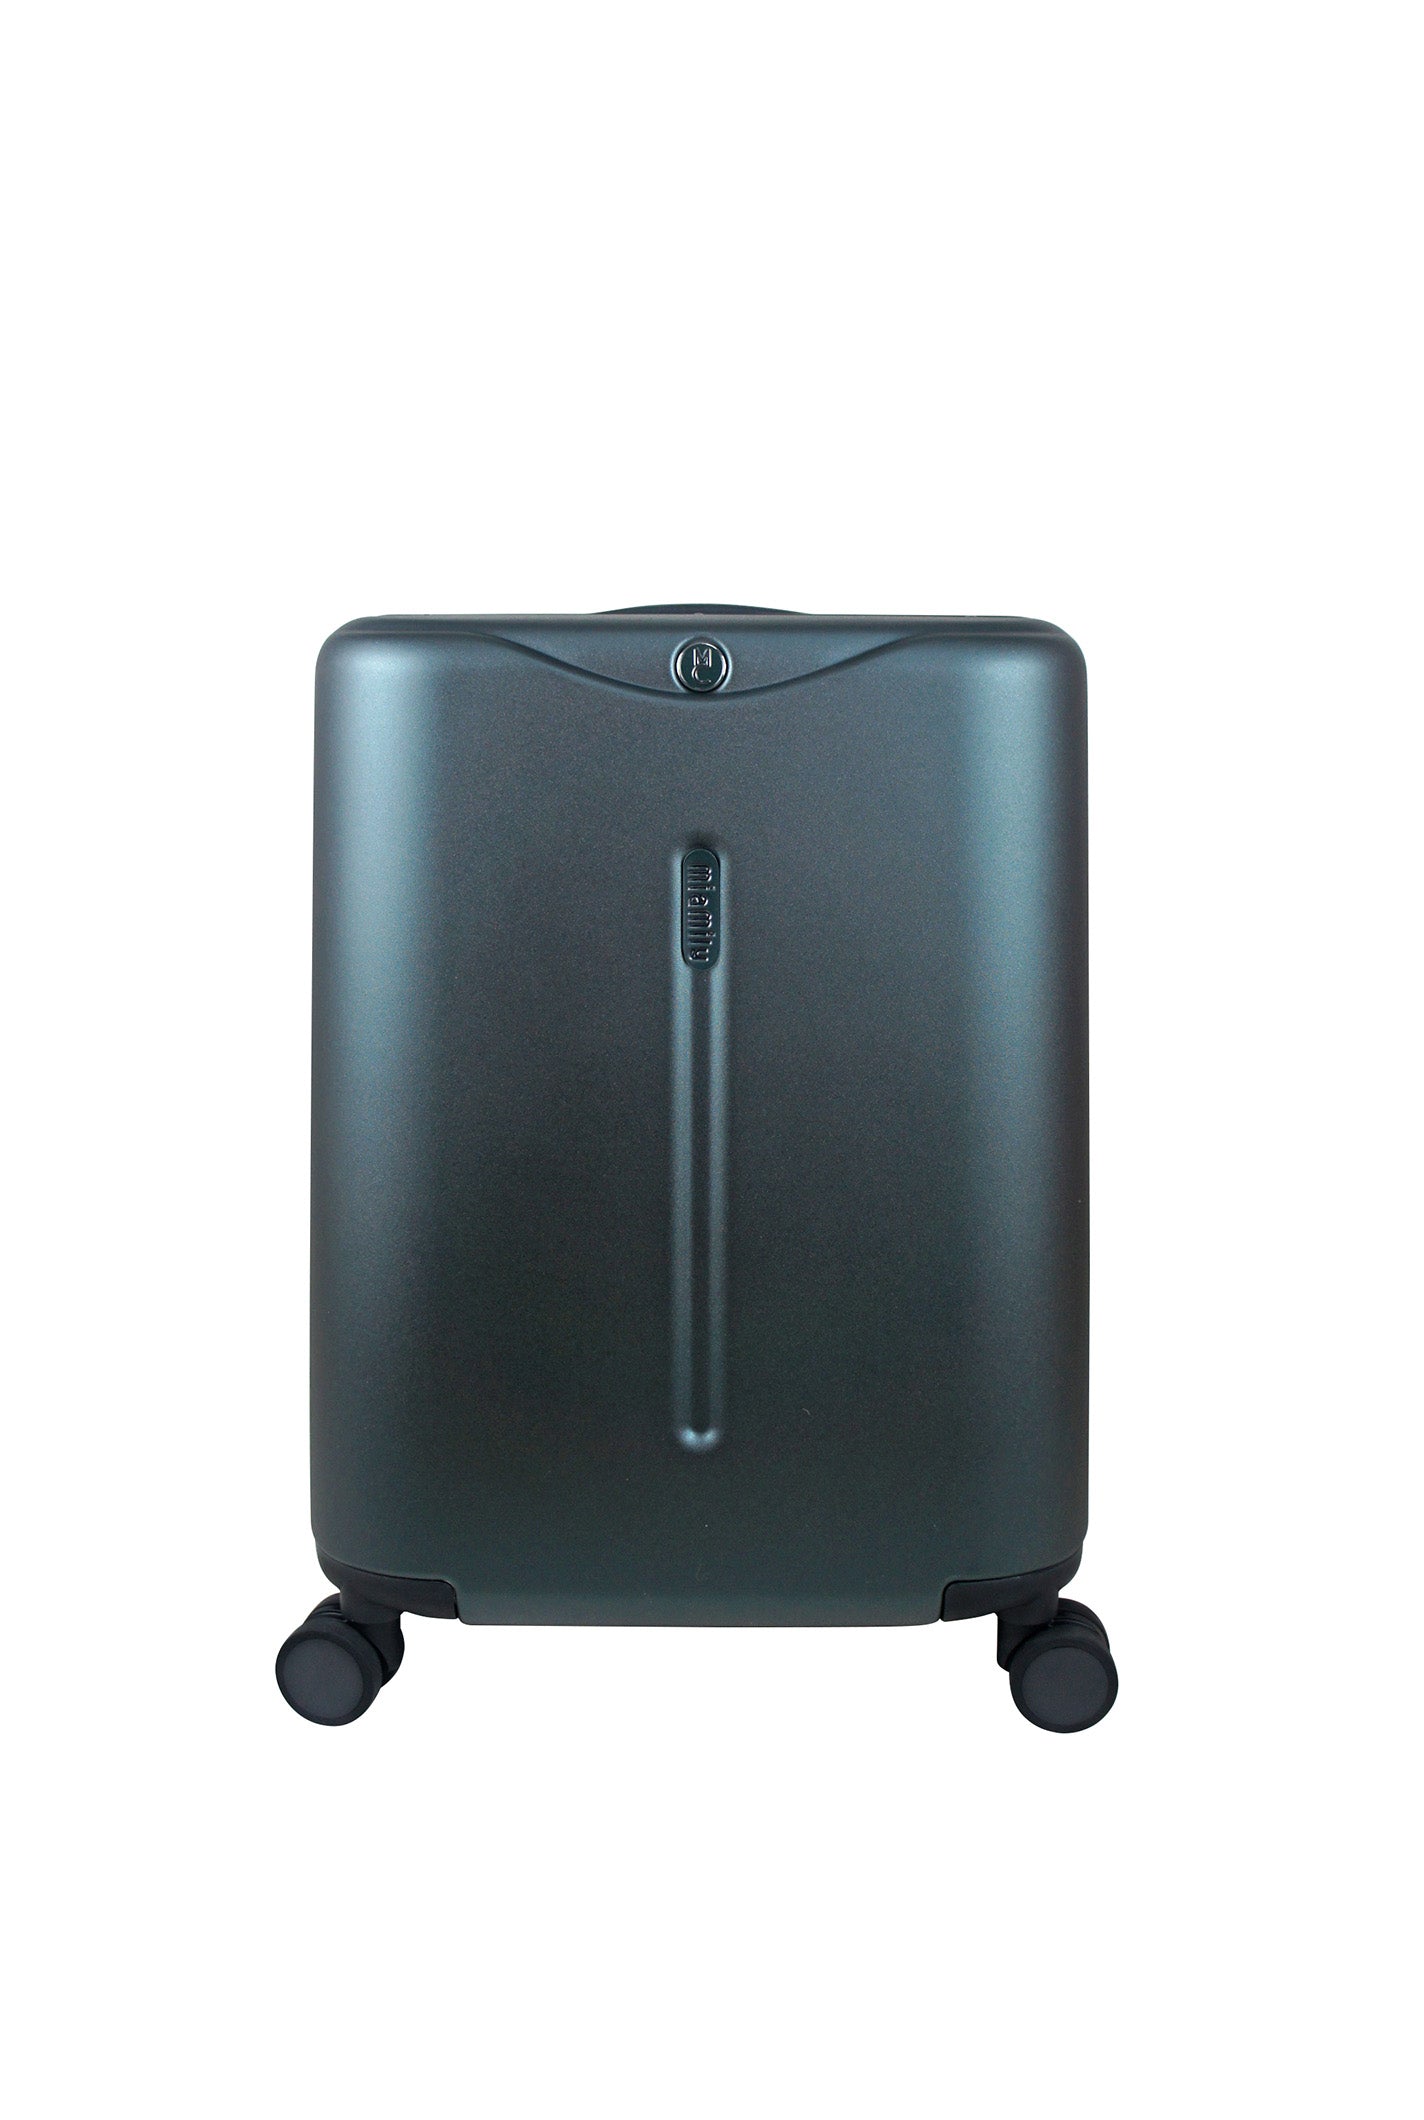 miamily luggage 18 inch forest green